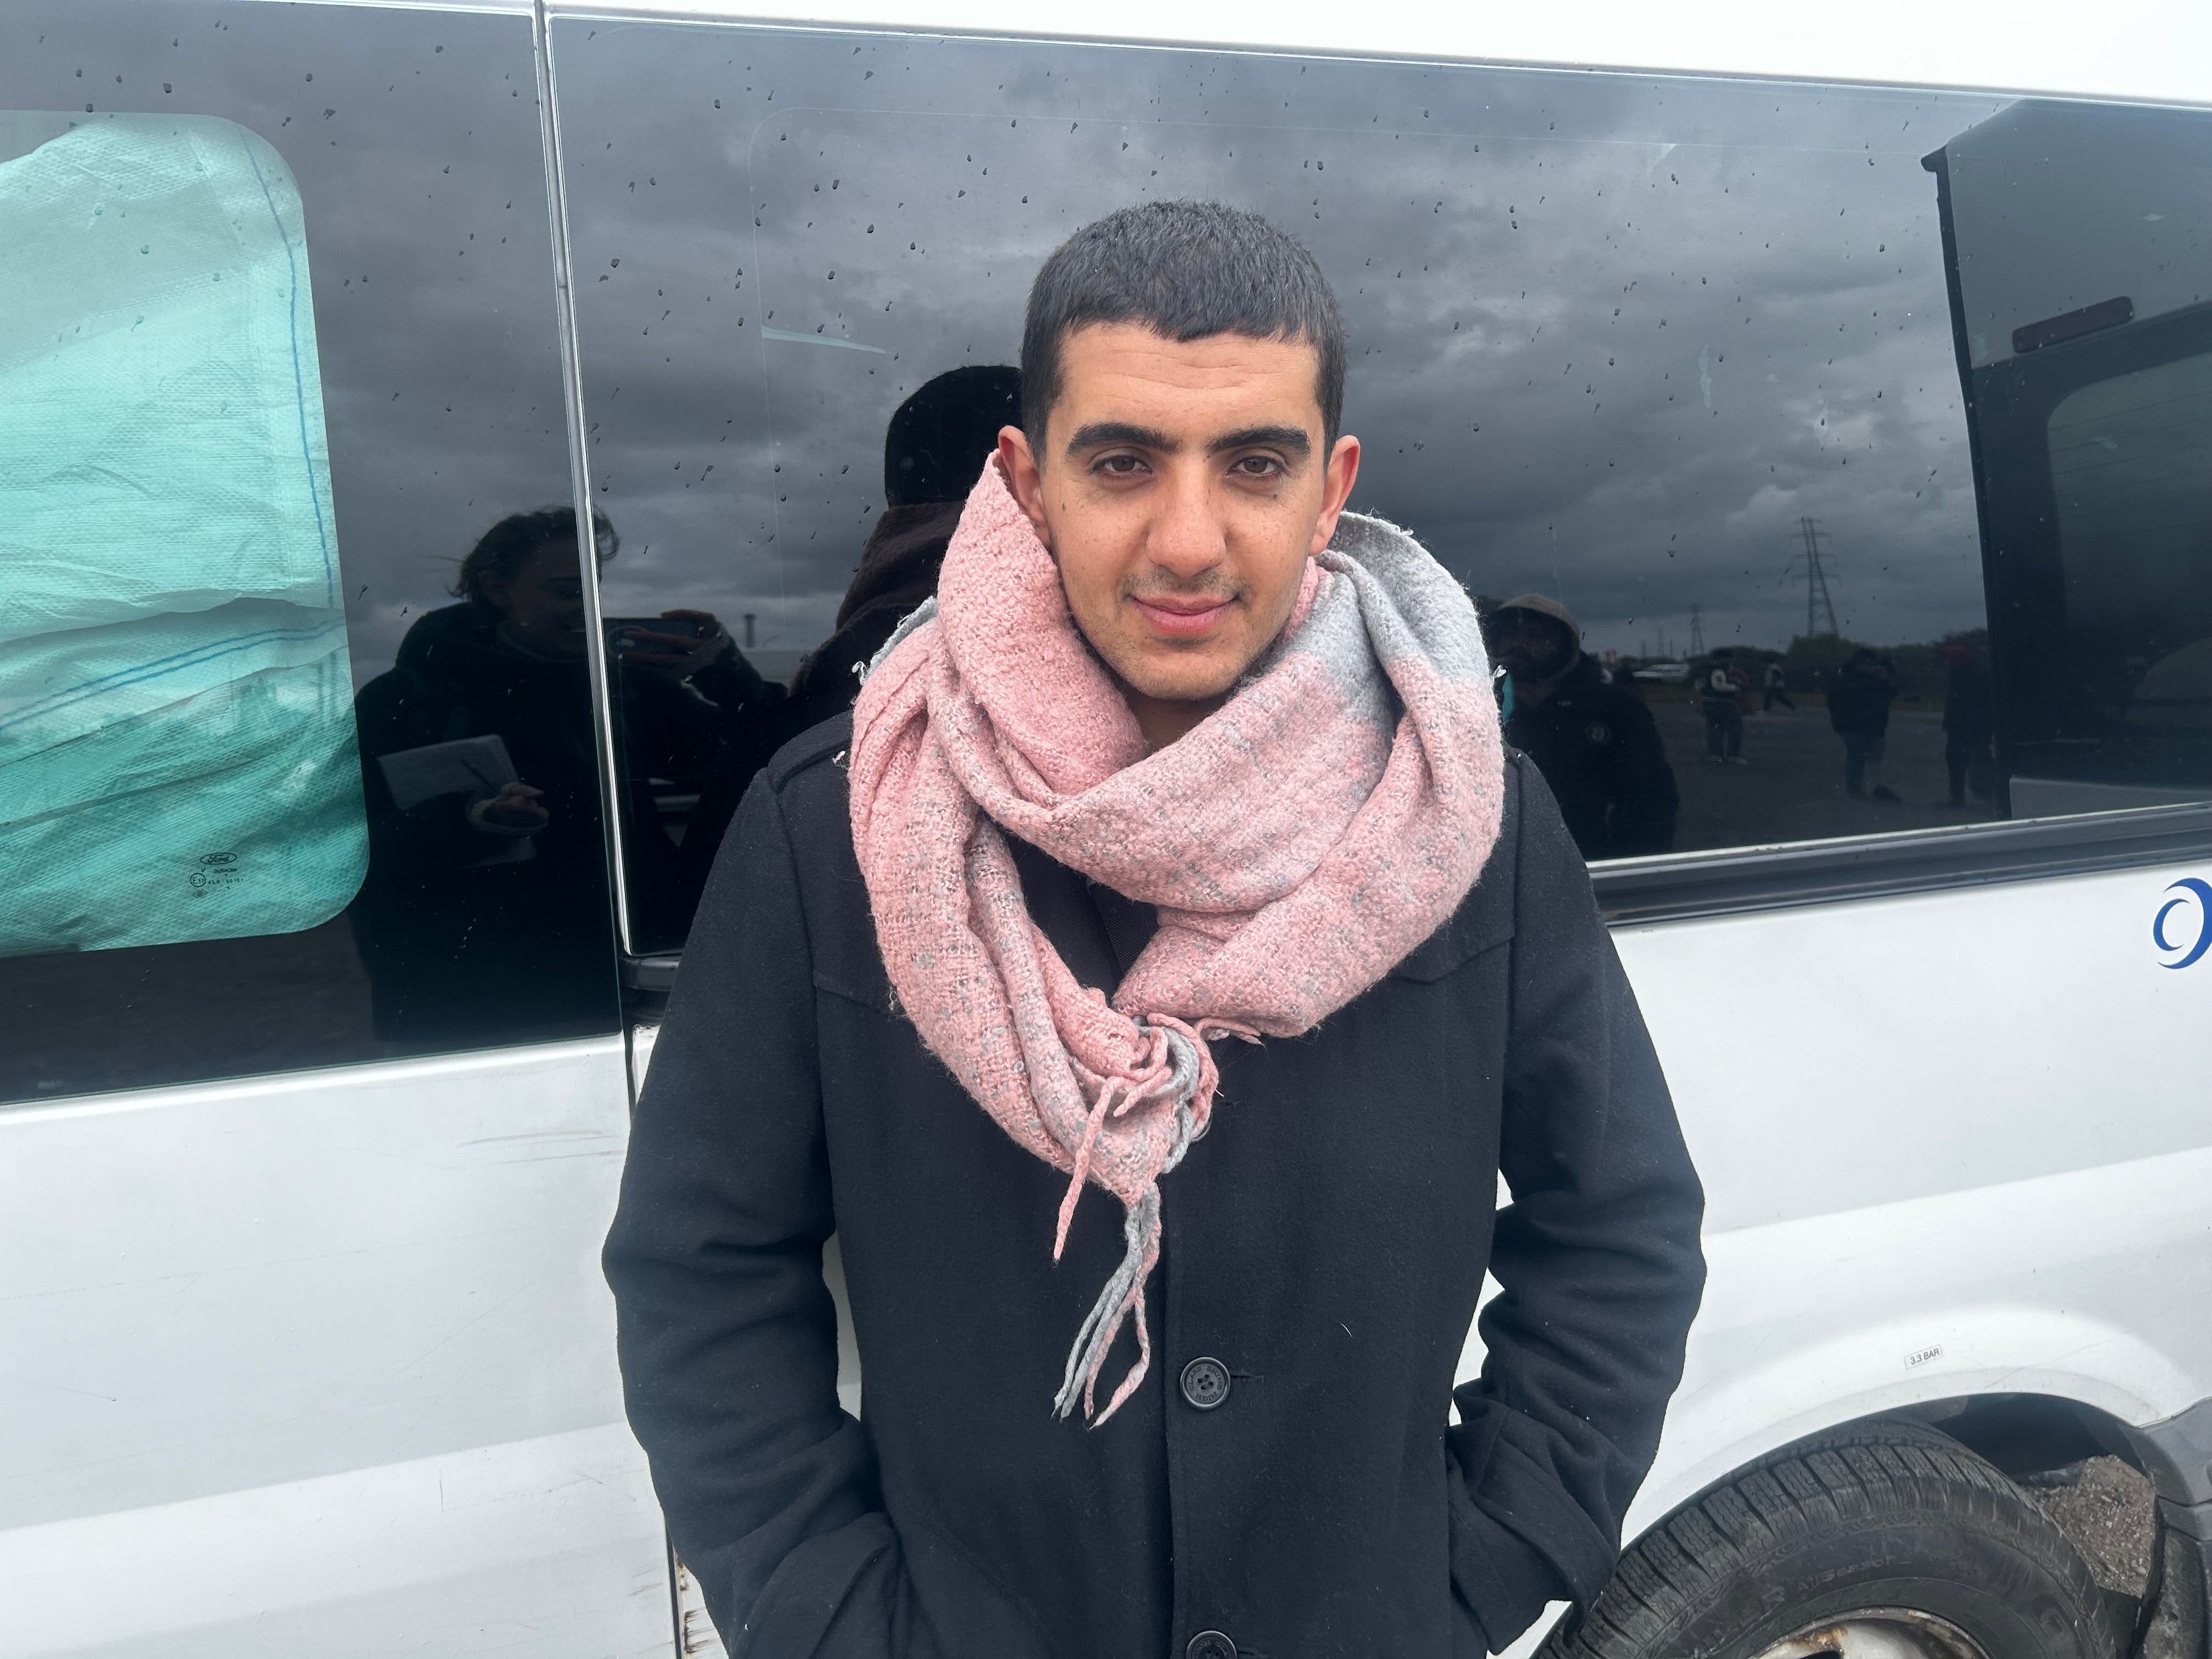 Rahmeen Mohammad, 22, came to France from Turkey by lorry